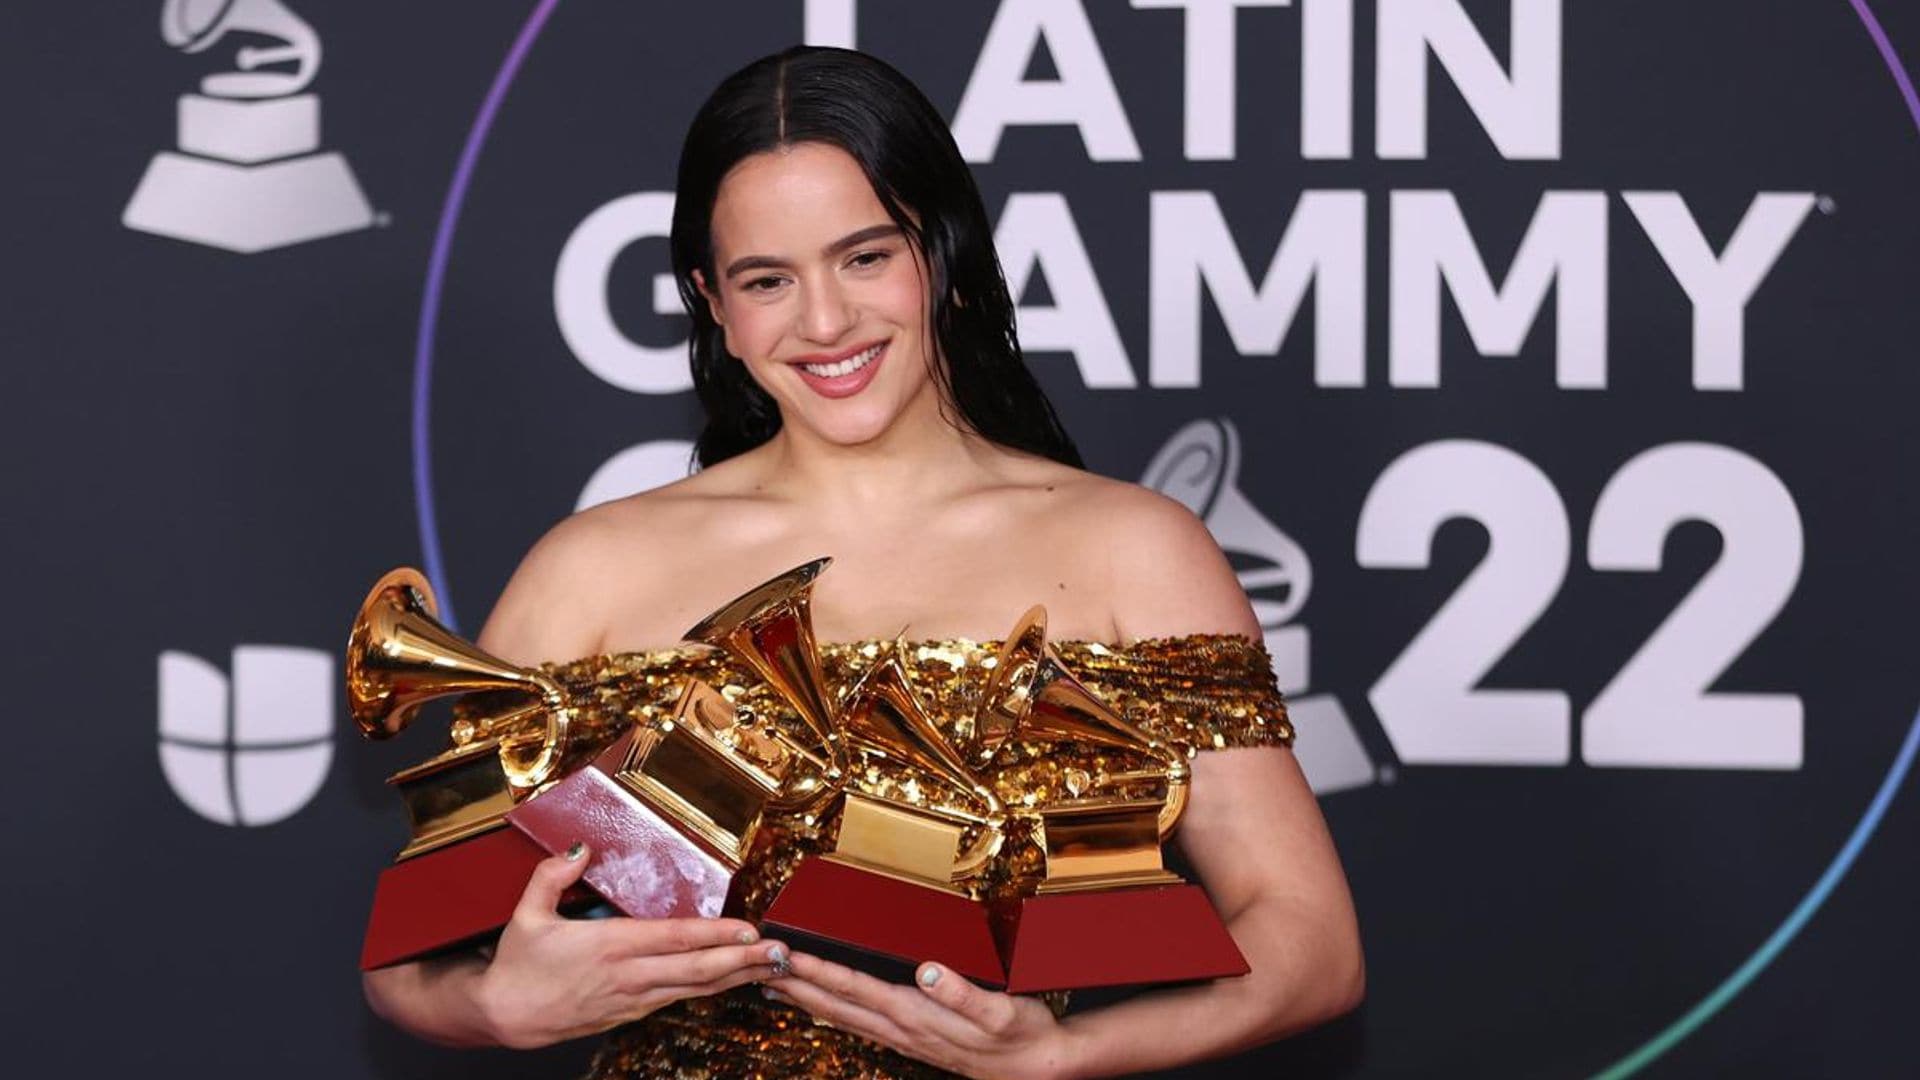 Jorge Drexler and Rosalía win big at the Latin Grammy 2022: See the complete list of winners